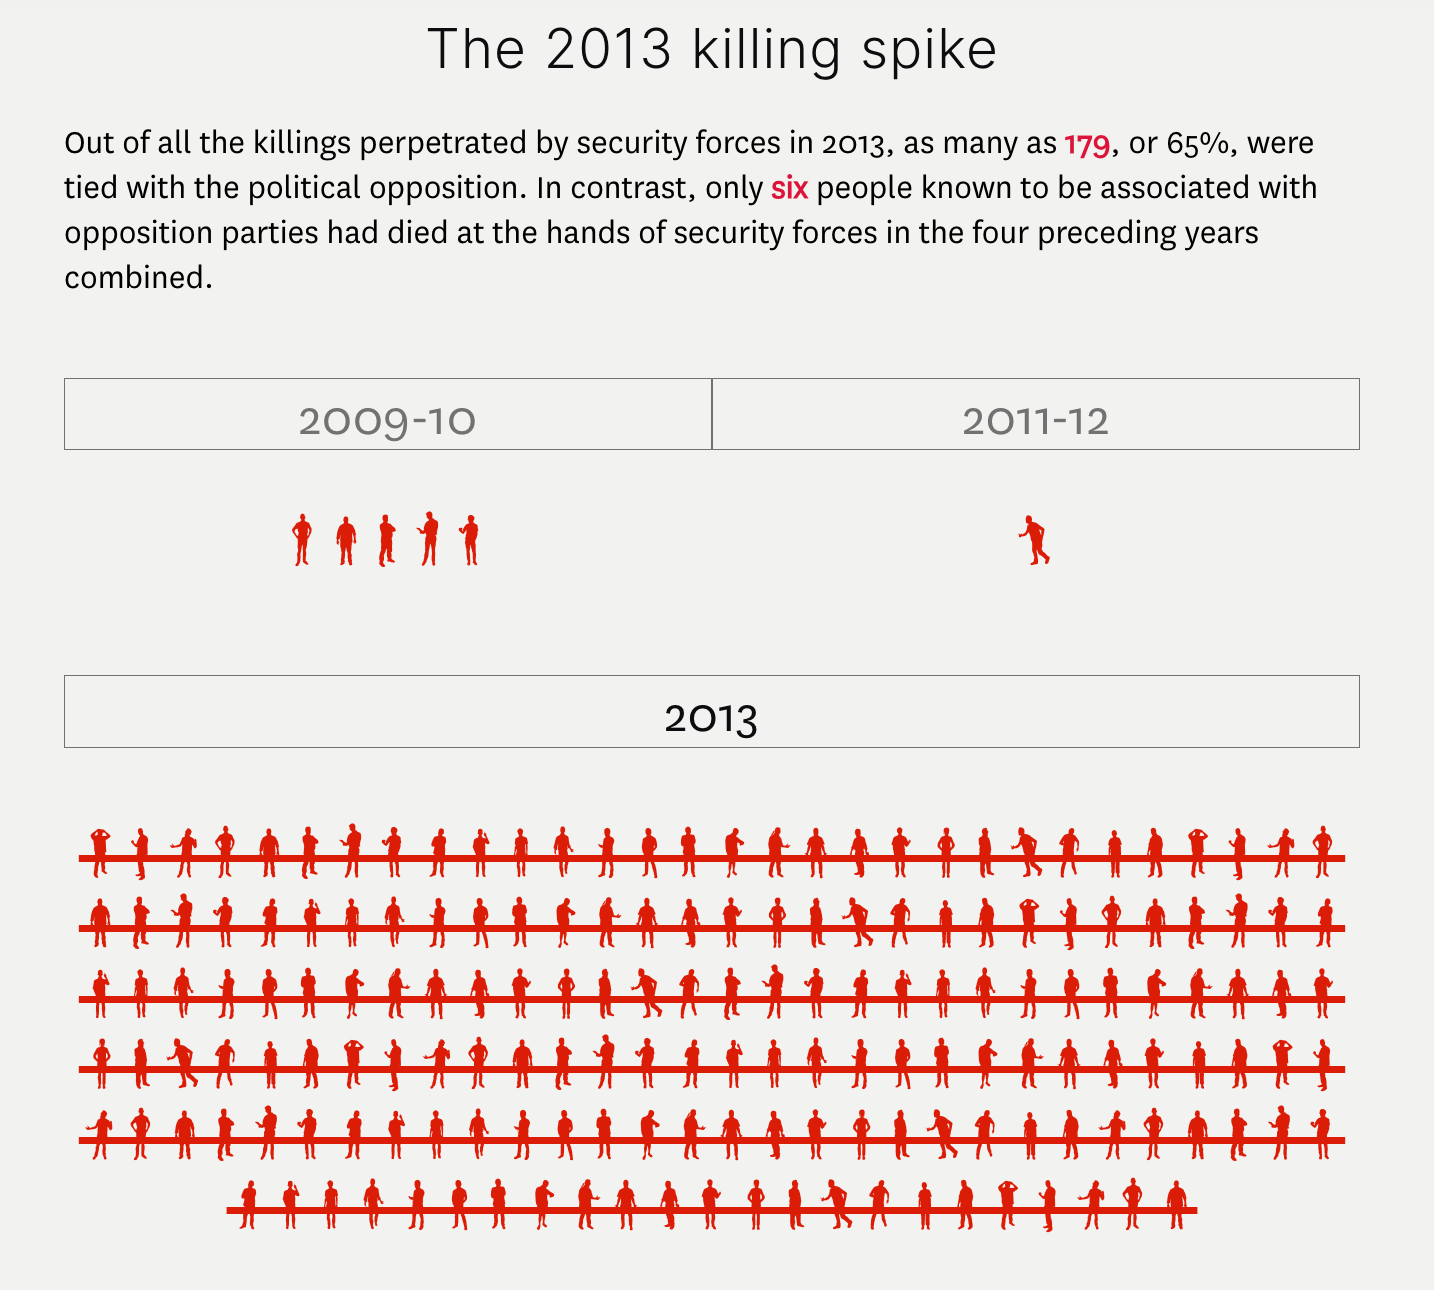 A visualization of all killings by the security forces of Bangladesh. Each killing is represented by a little person